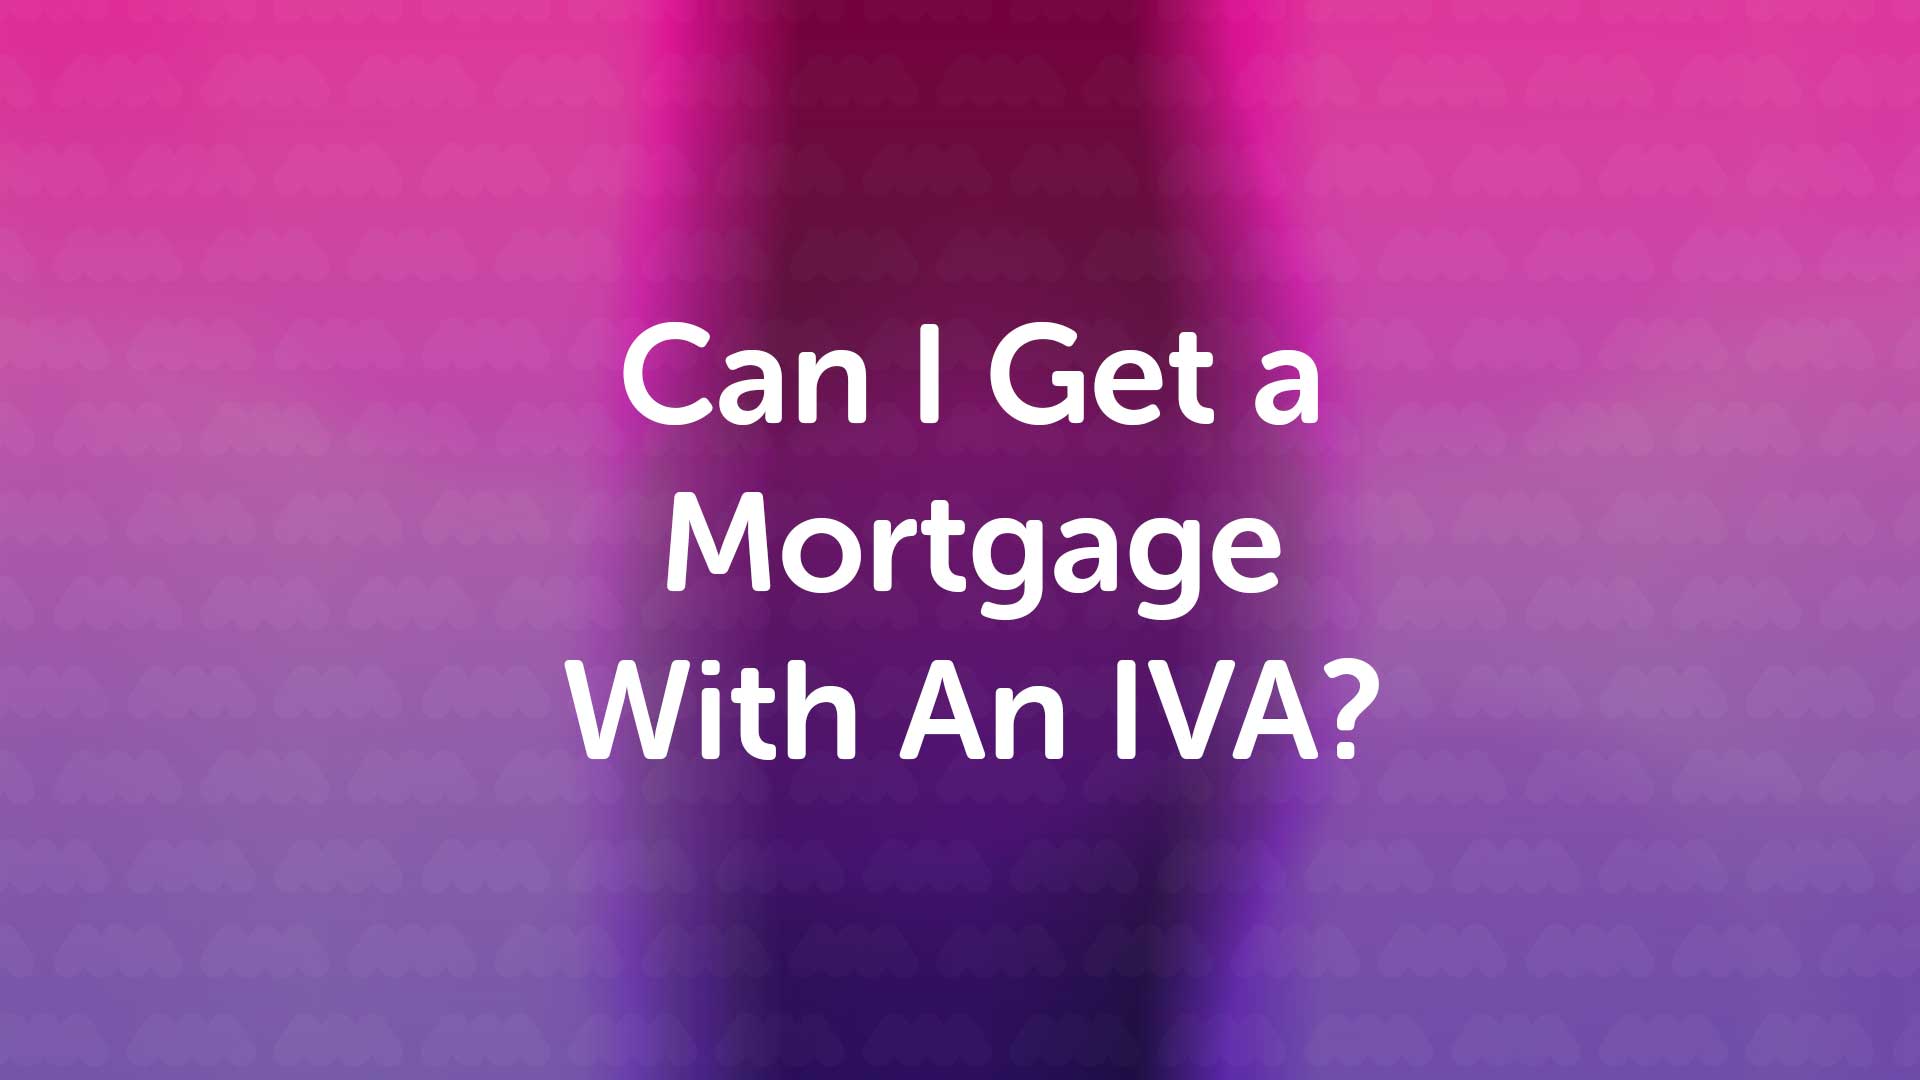 Mortgage With IVA